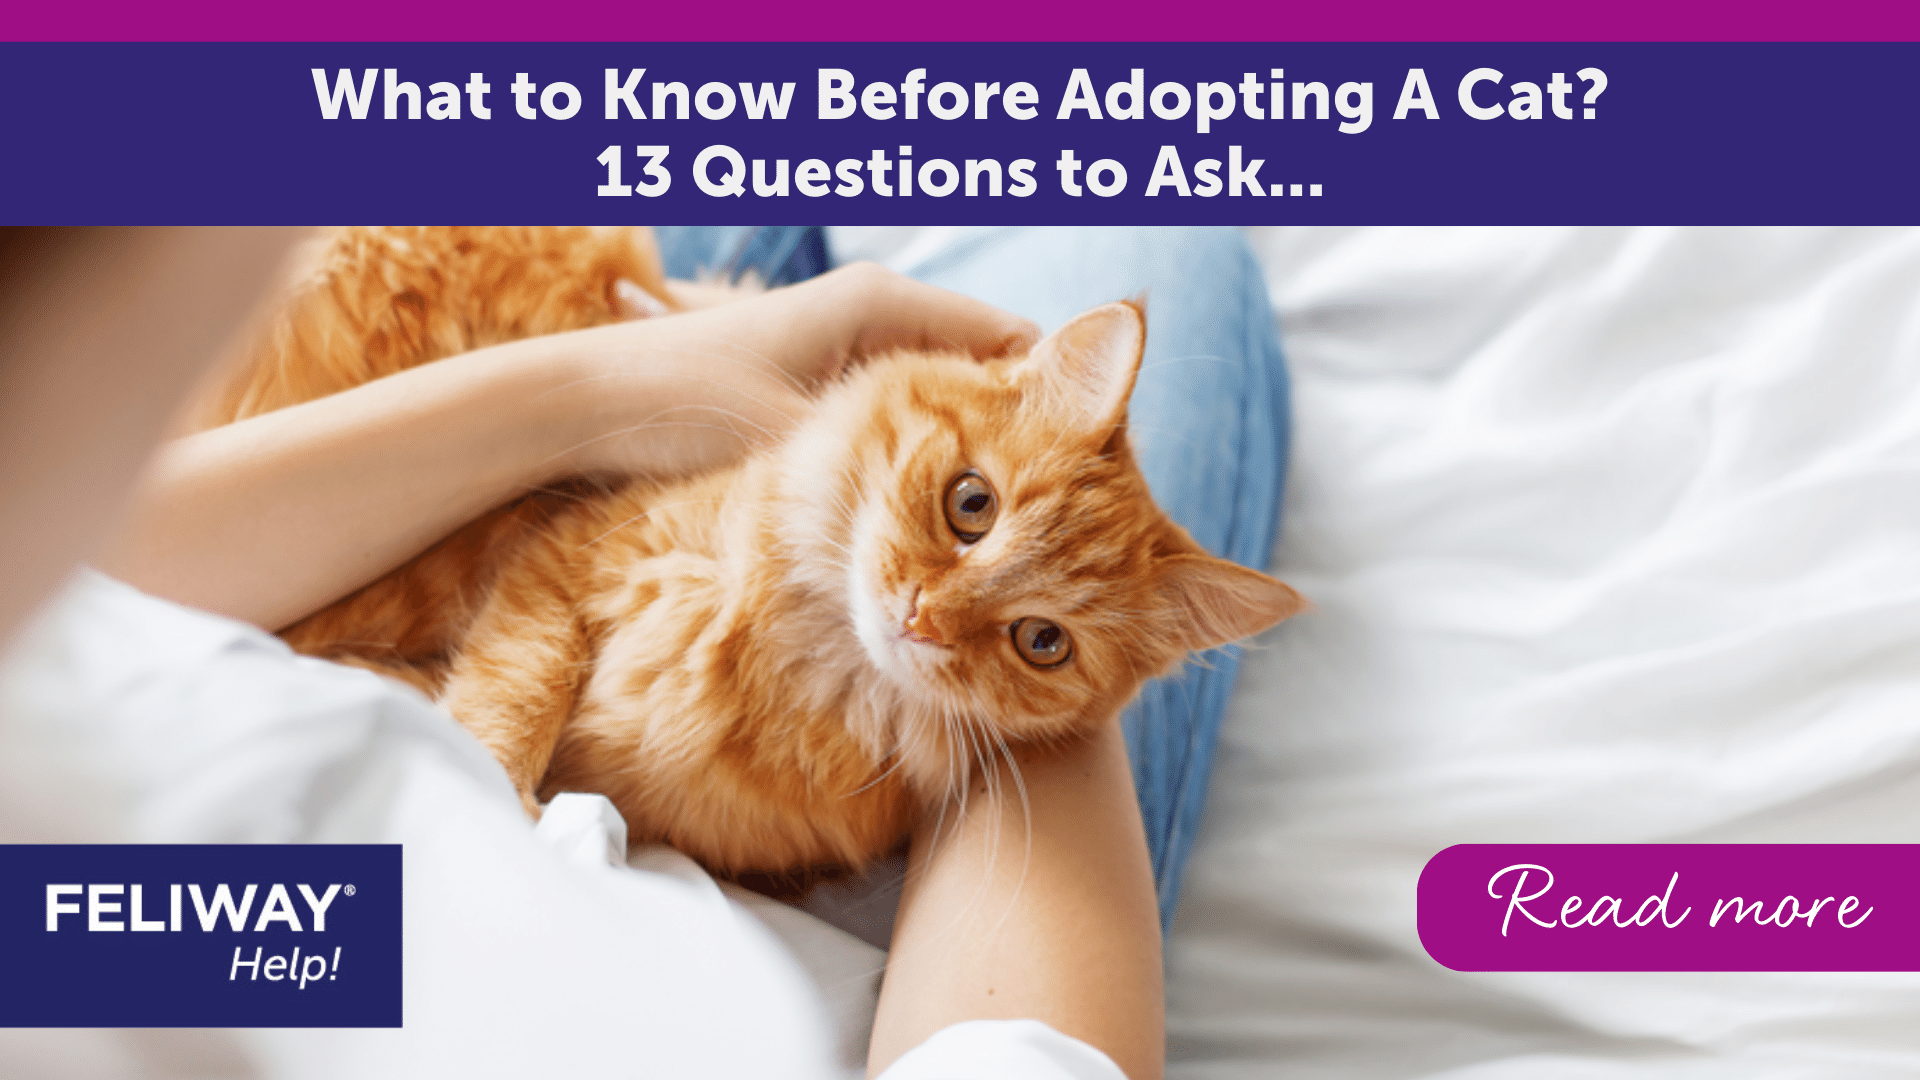 What to know before adopting a cat? 13 questions to ask...